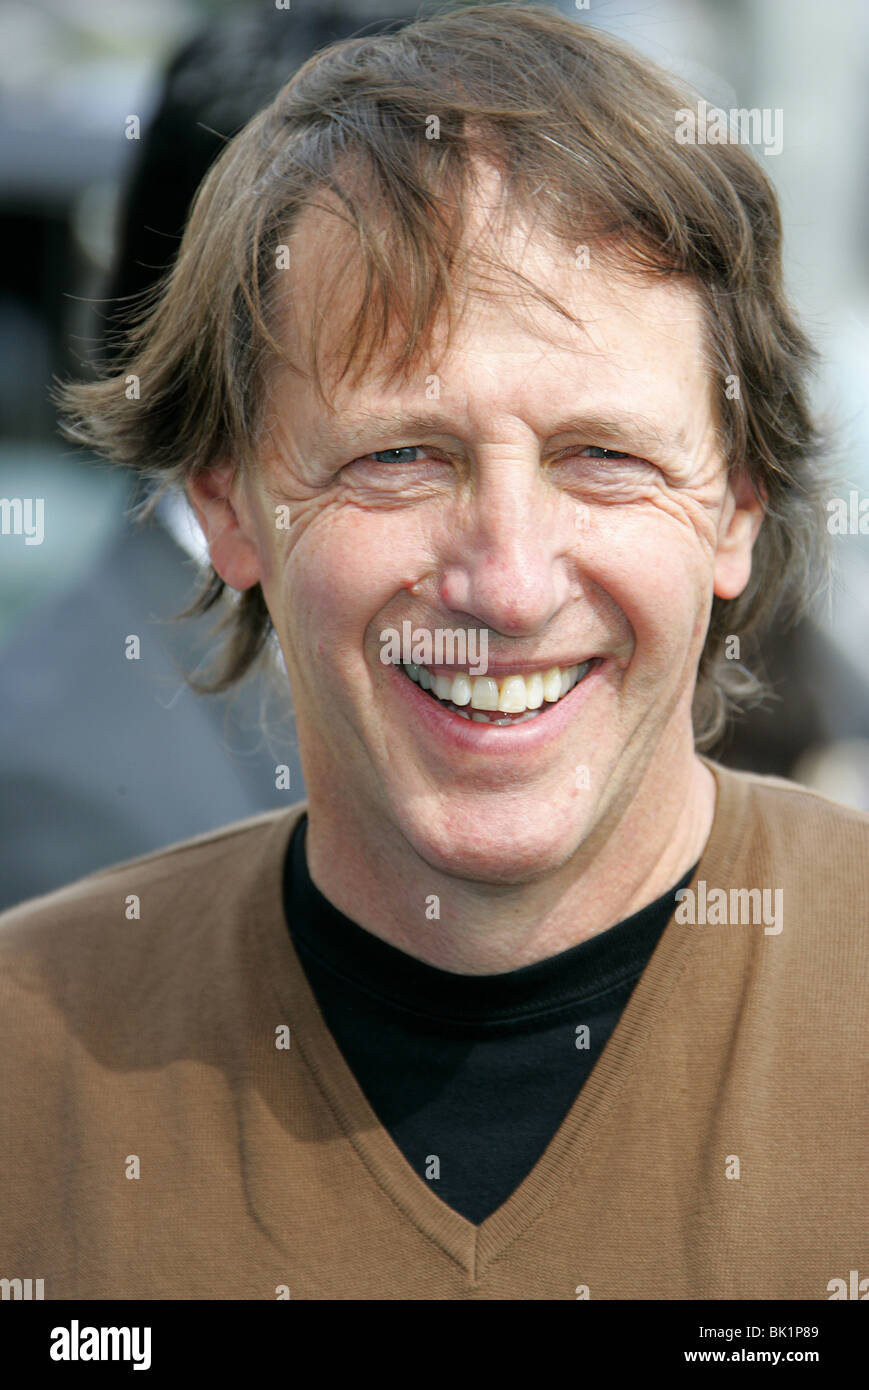 DENNIS DUGAN THE BENCHWARMERS PREMIERE WESTWOOD LOS ANGELES USA 02 April 2006 Stock Photo